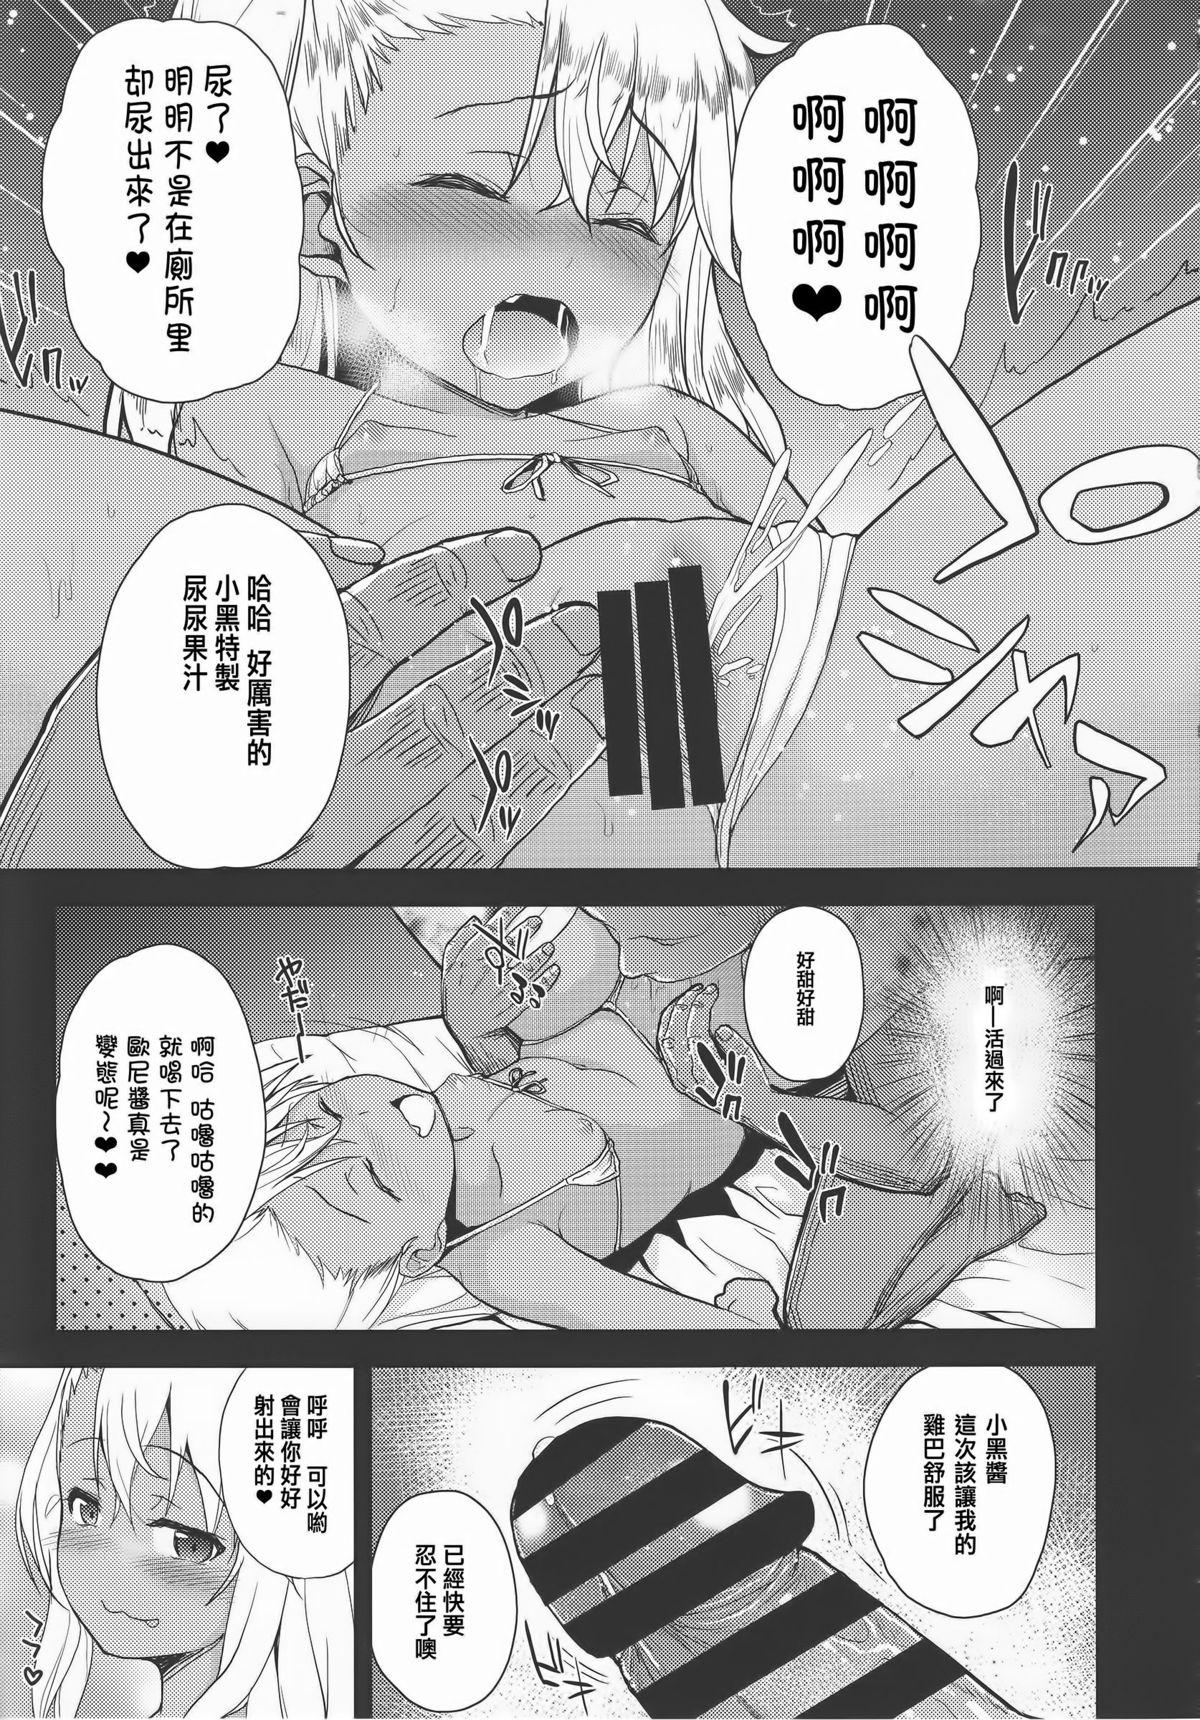 Hard Cock Chloe-chan no Iru Omise - Fate kaleid liner prisma illya Squirters - Page 9